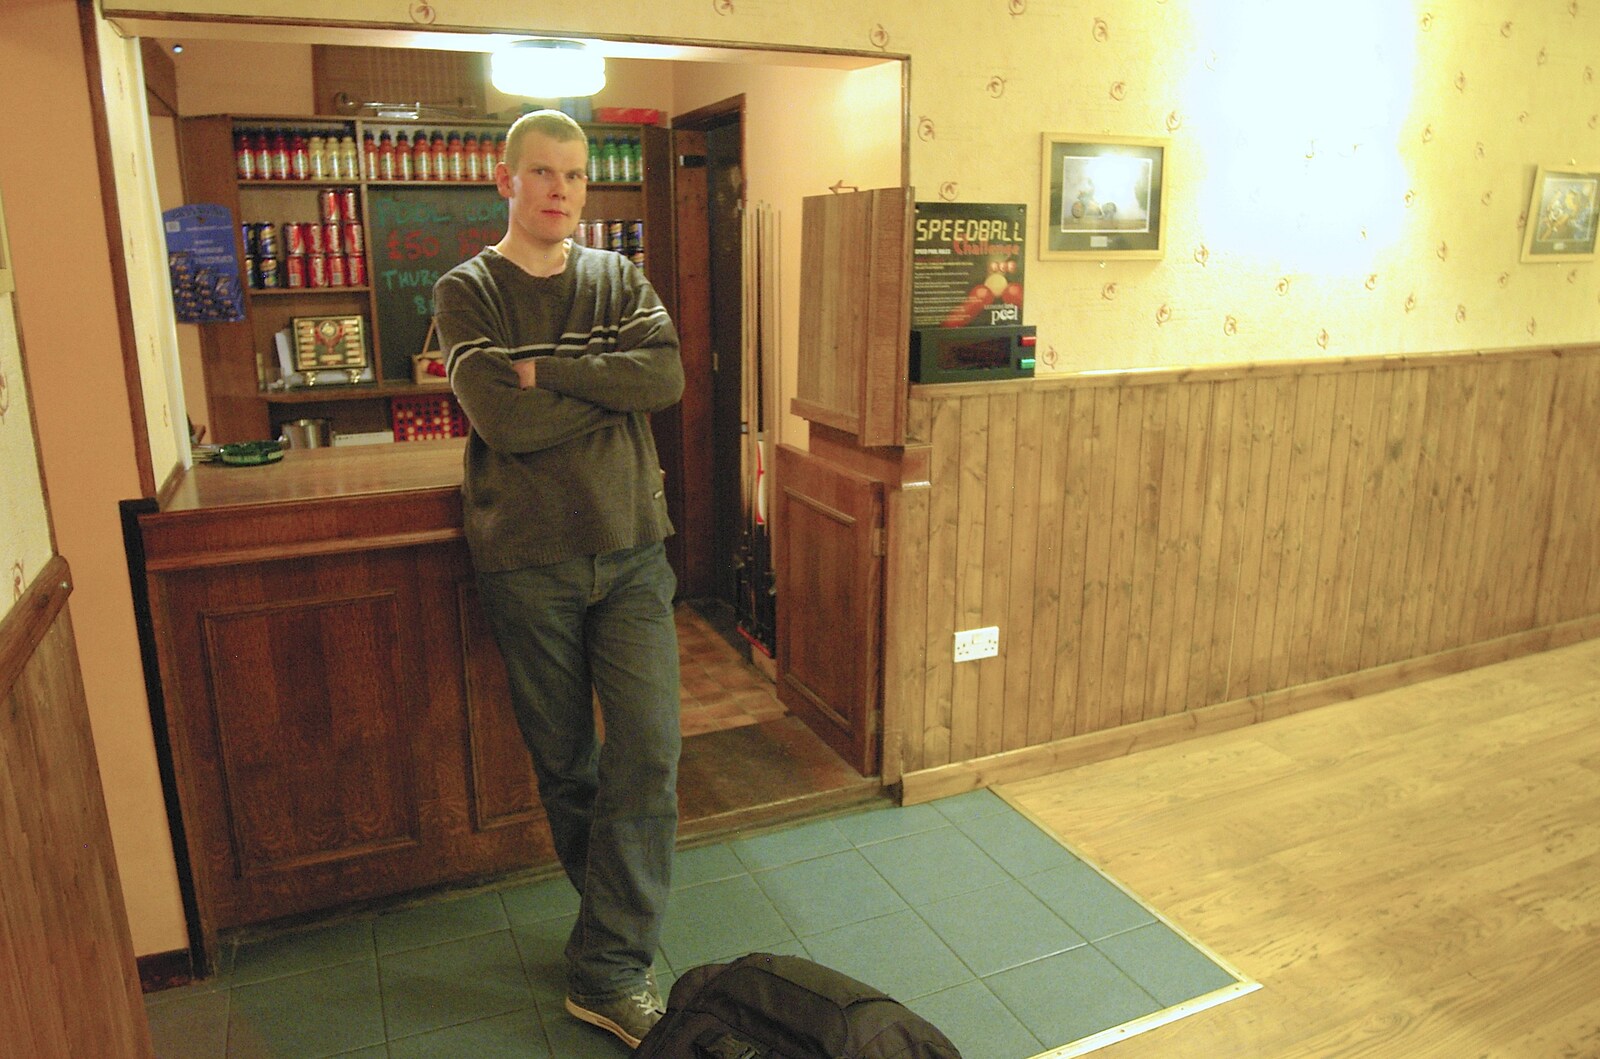 Bill lurks at the bar from Wrecked Cars, A Night Out and Stick Game in the Cherry Tree, Cambridge and Yaxley, Suffolk- 24th February 2006